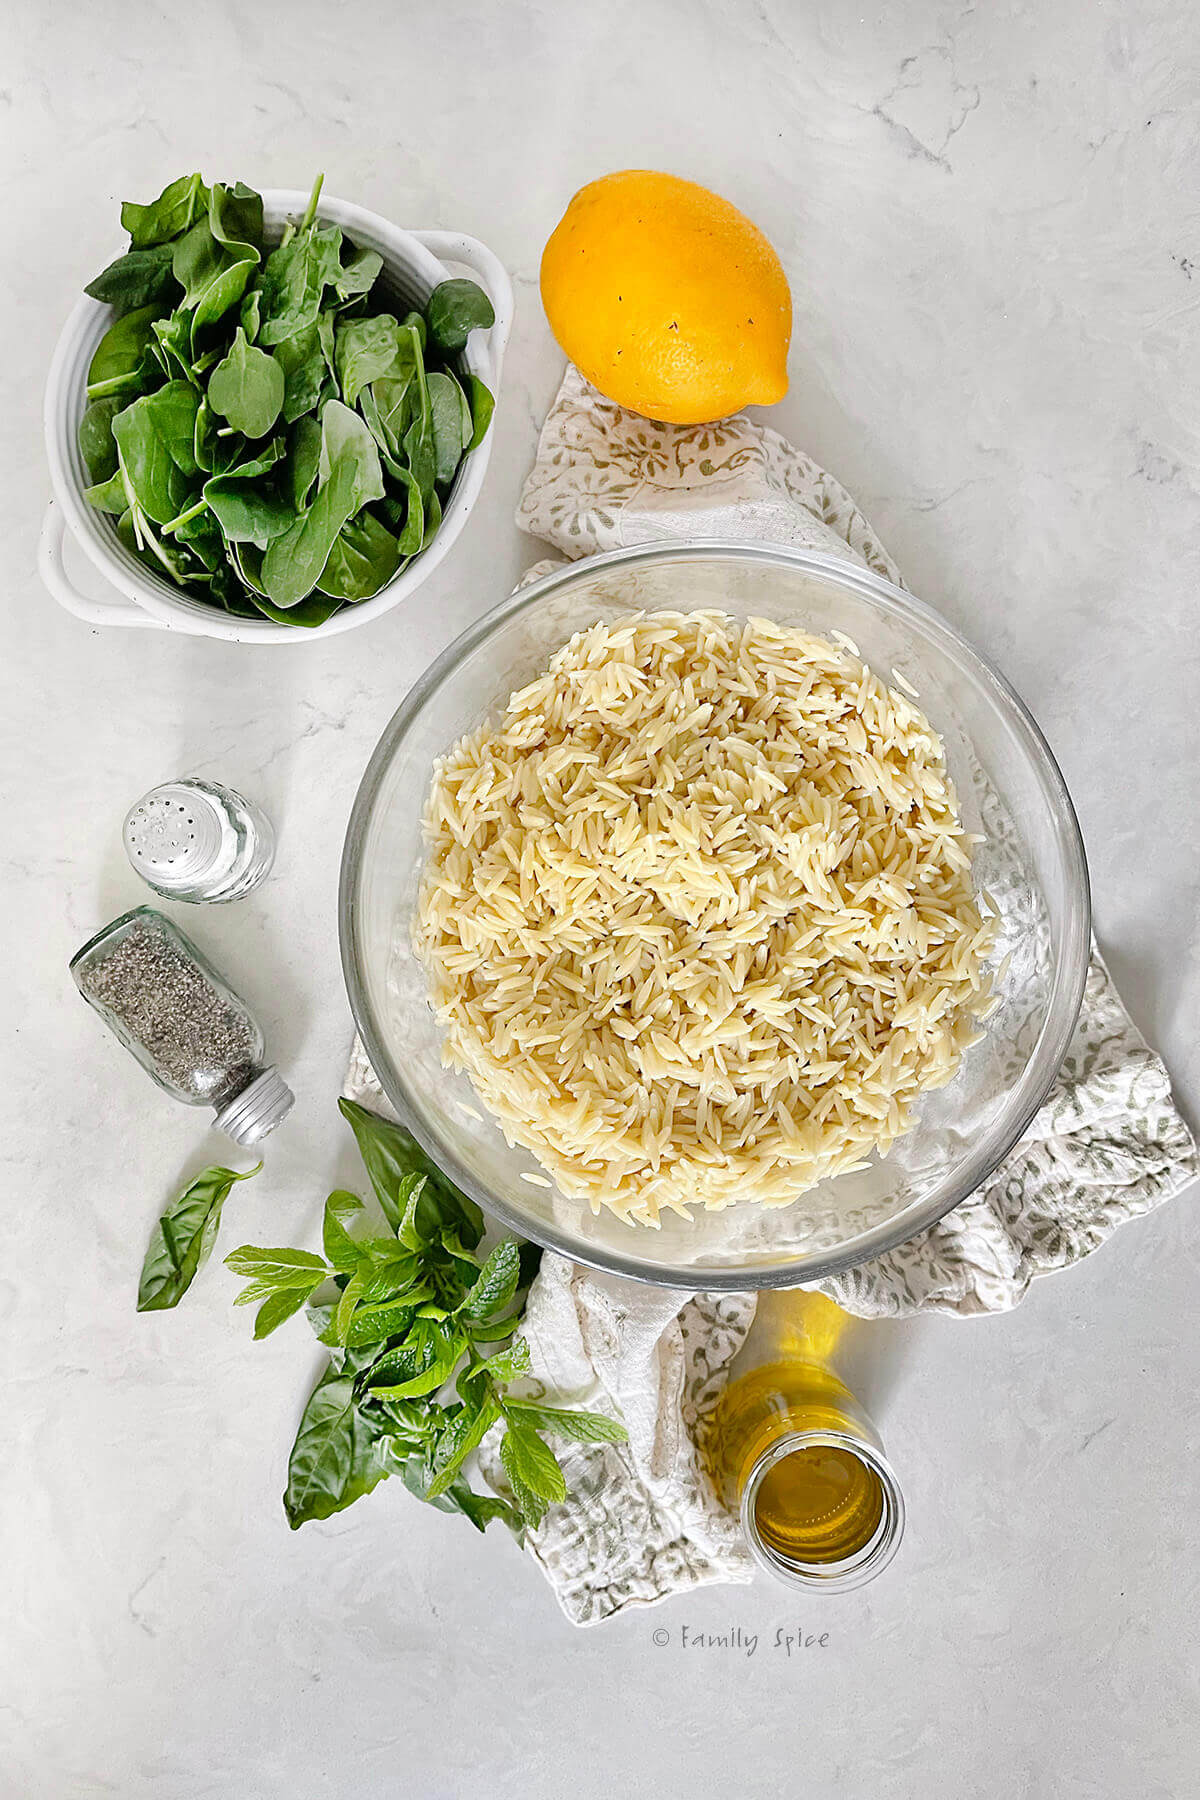 A glass mixing bowl with cooked orzo pasta in it with a bowl of fresh spinach next to it, along with a lemon, salt and pepper, fresh herbs and olive oil